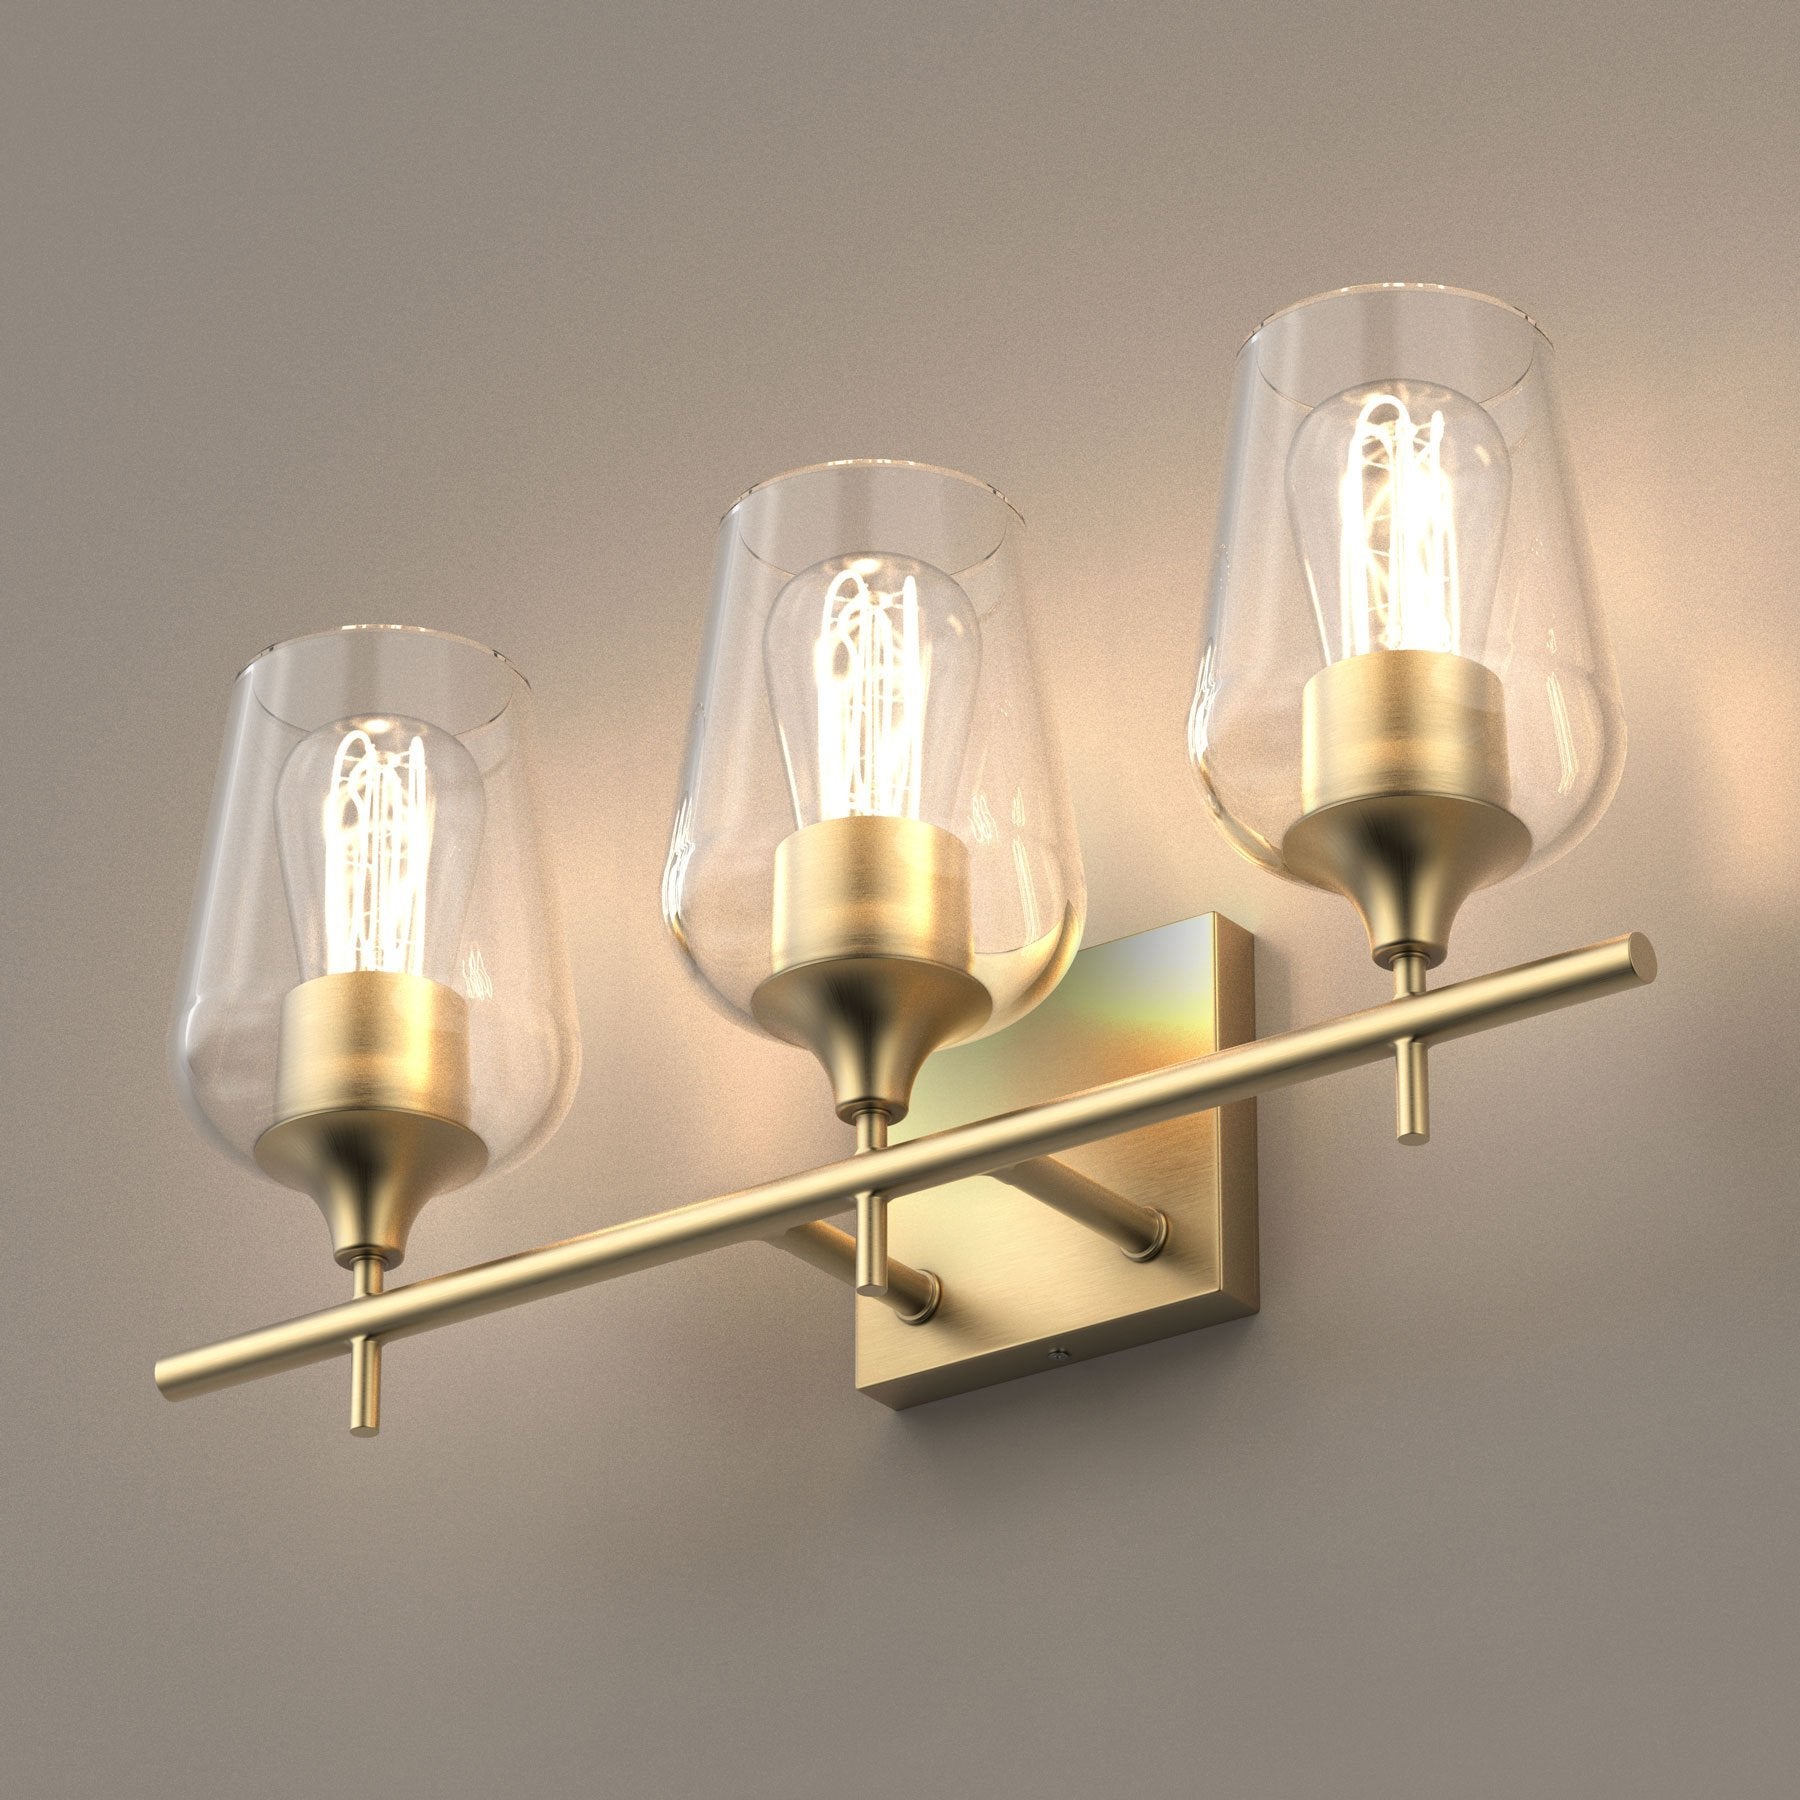 wall-sconces-in-gold-finish-e26-socket